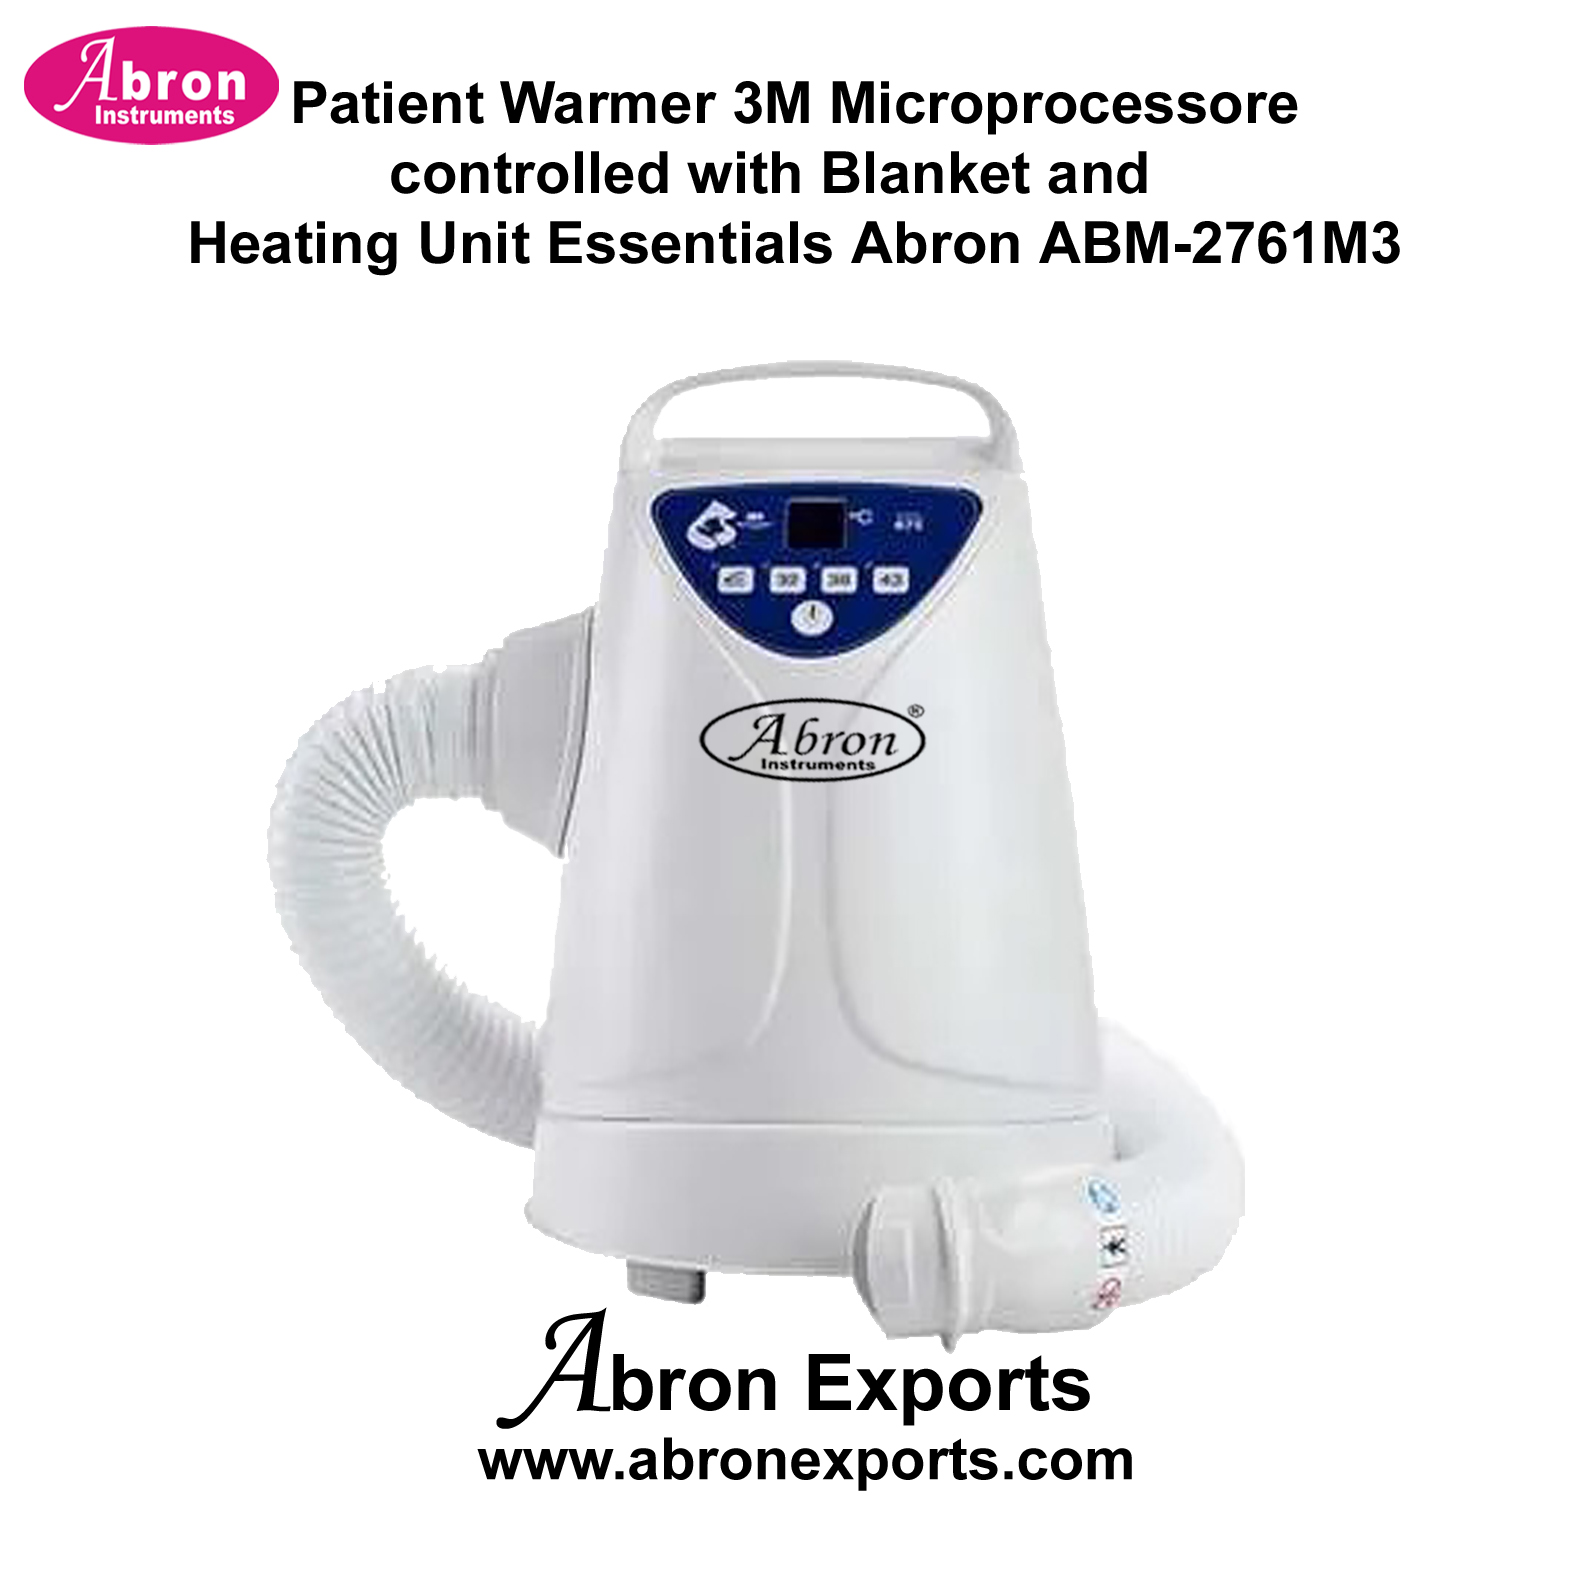 Patient warmer 3M microprocessore controlled with blanket and heating unit Essentials Abron ABM-2761M3